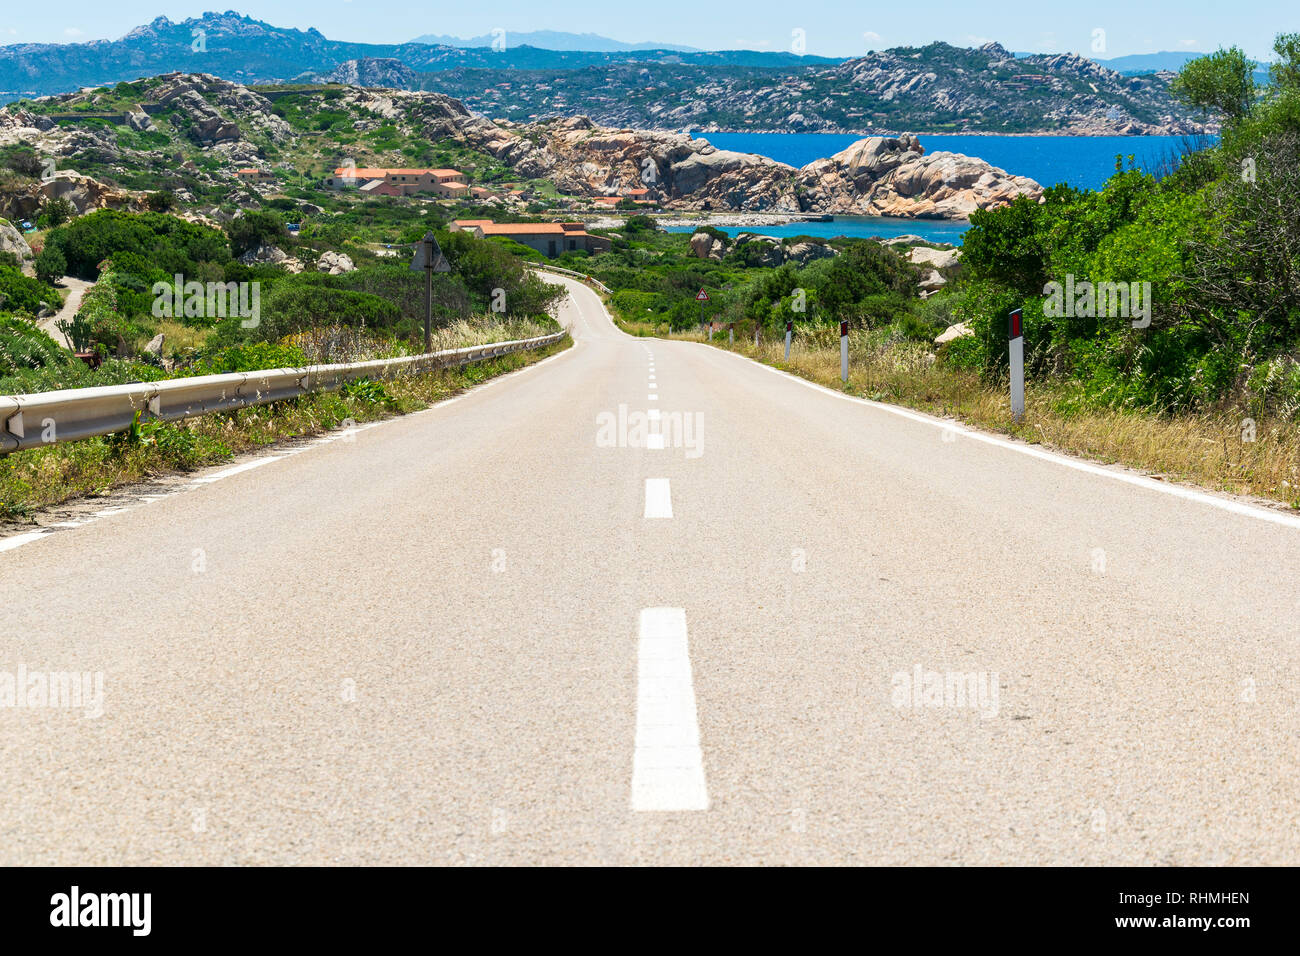 Asphalt empy road surrounded by rocky environment and turquoise sea on the beautiful island of la maddalena, italy Stock Photo